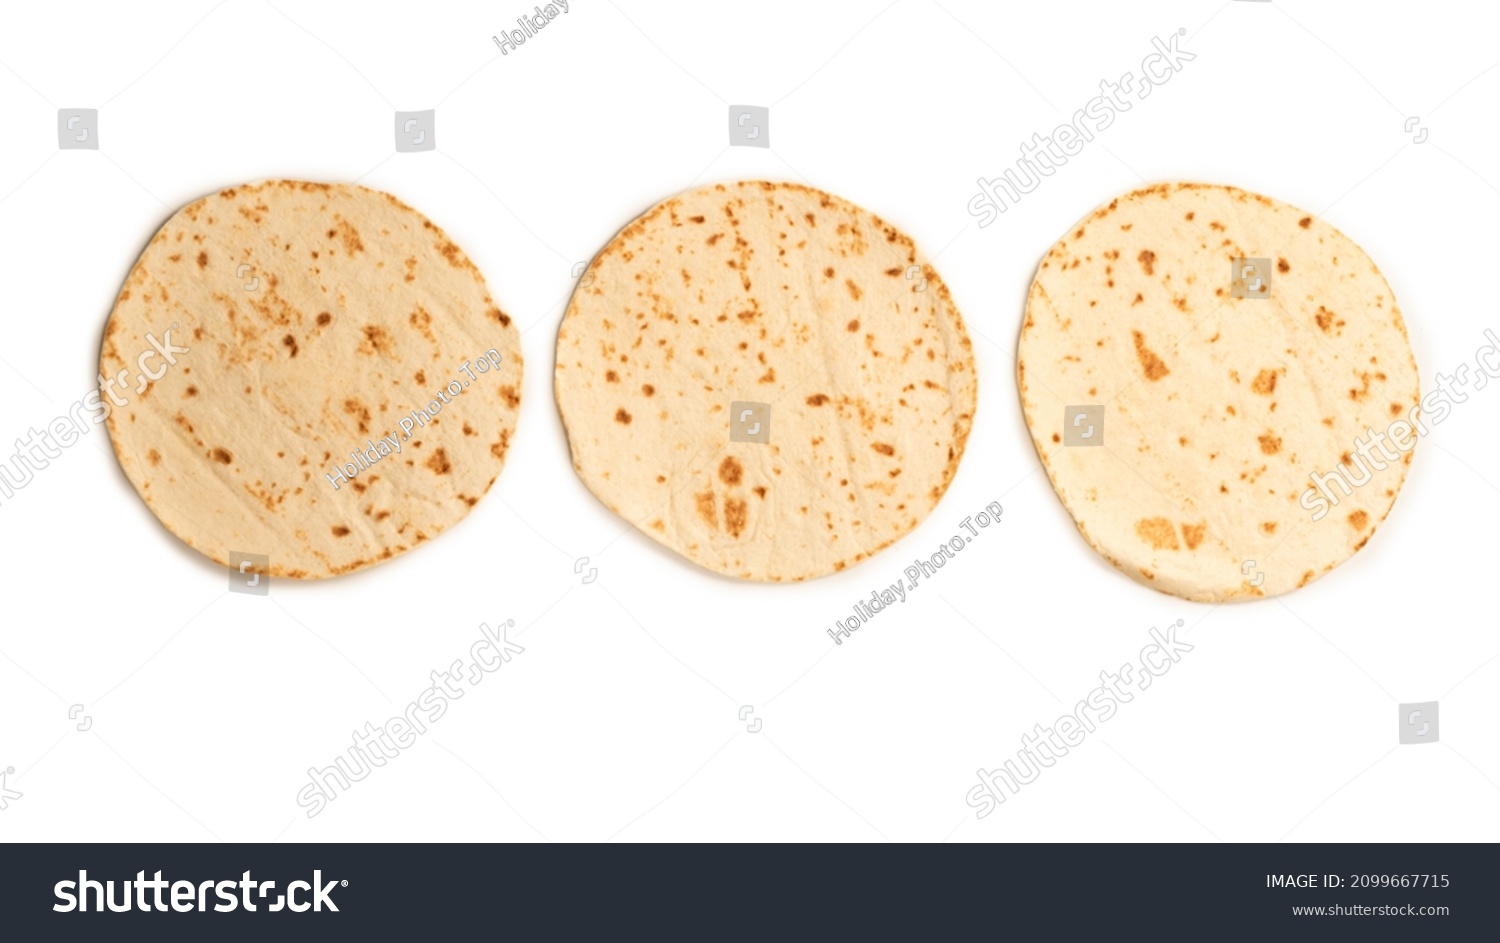 Pitta bread isolated on white background. Top view.  #2099667715